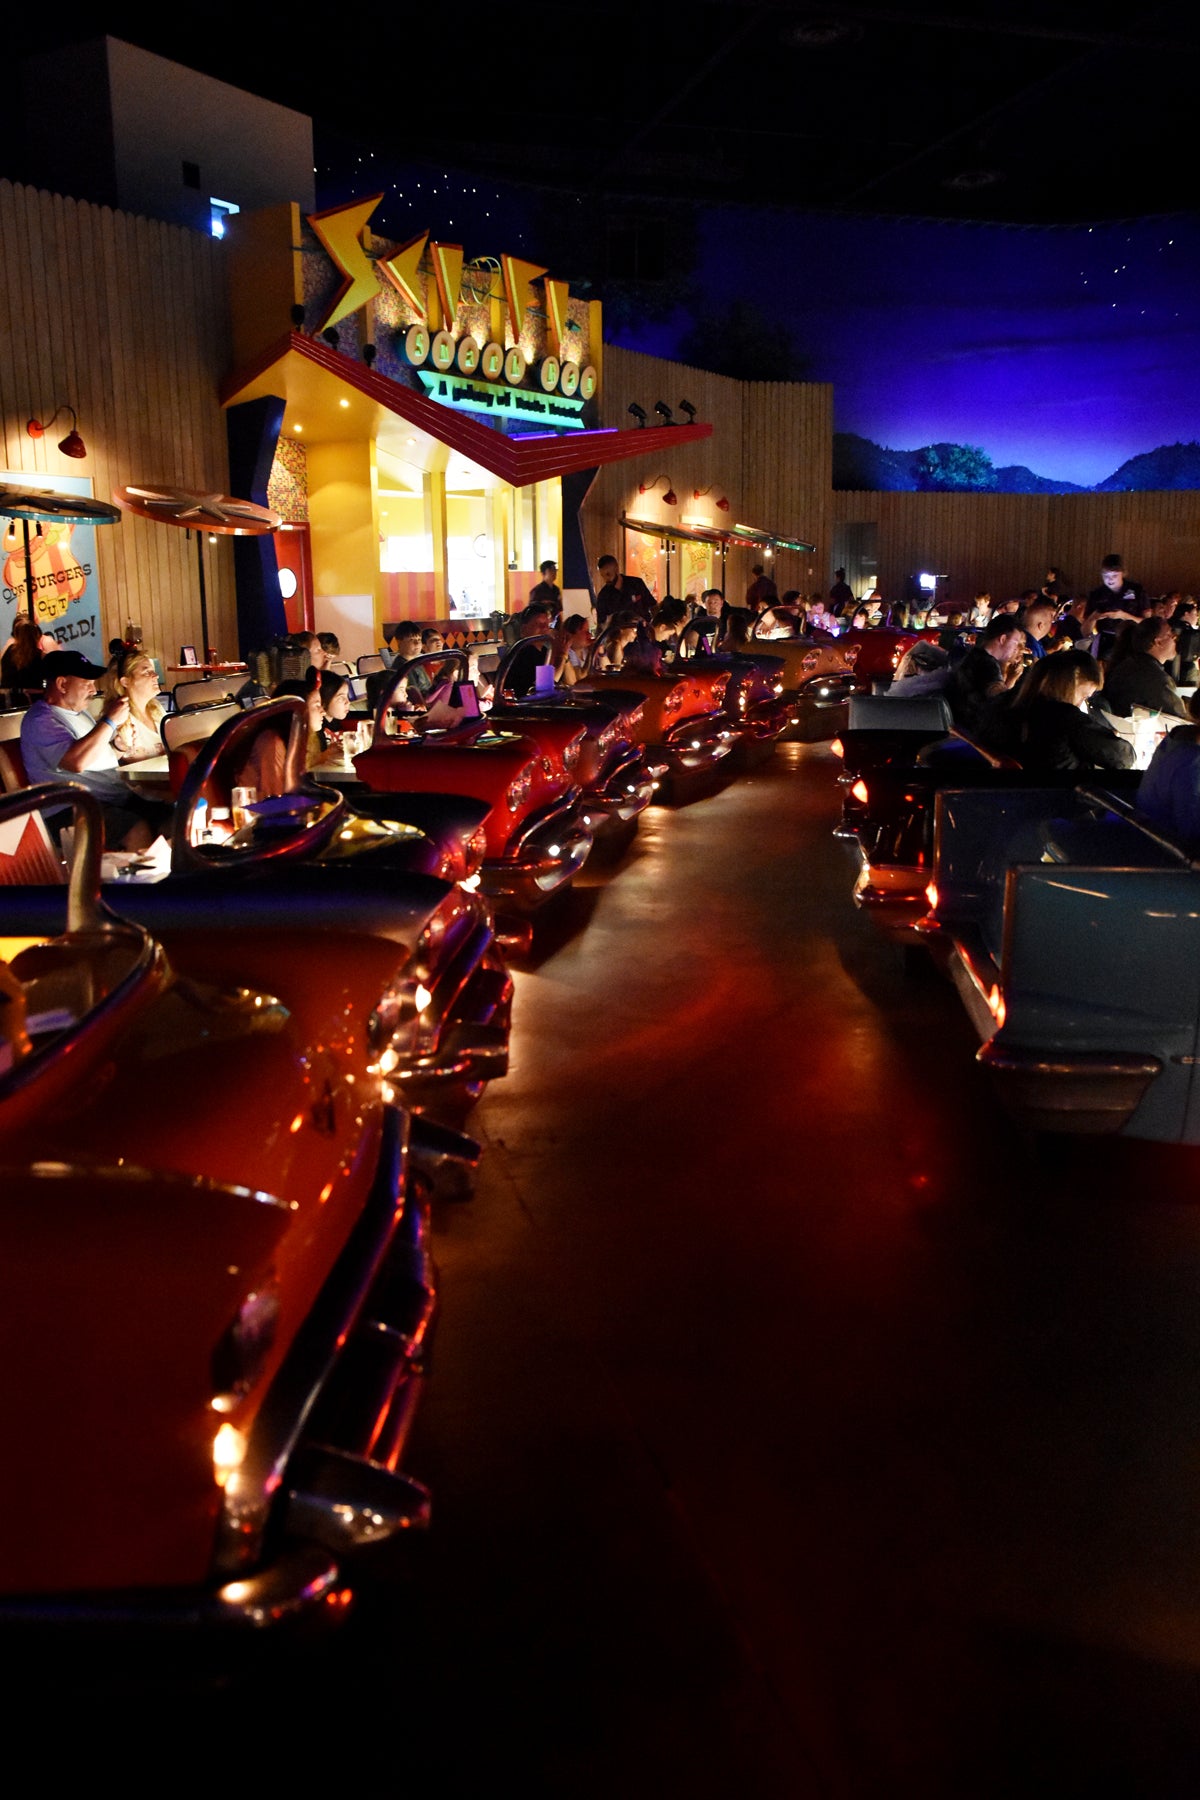 Sci-Fi Dine-In Theater Review | Disney's Hollywood Studios